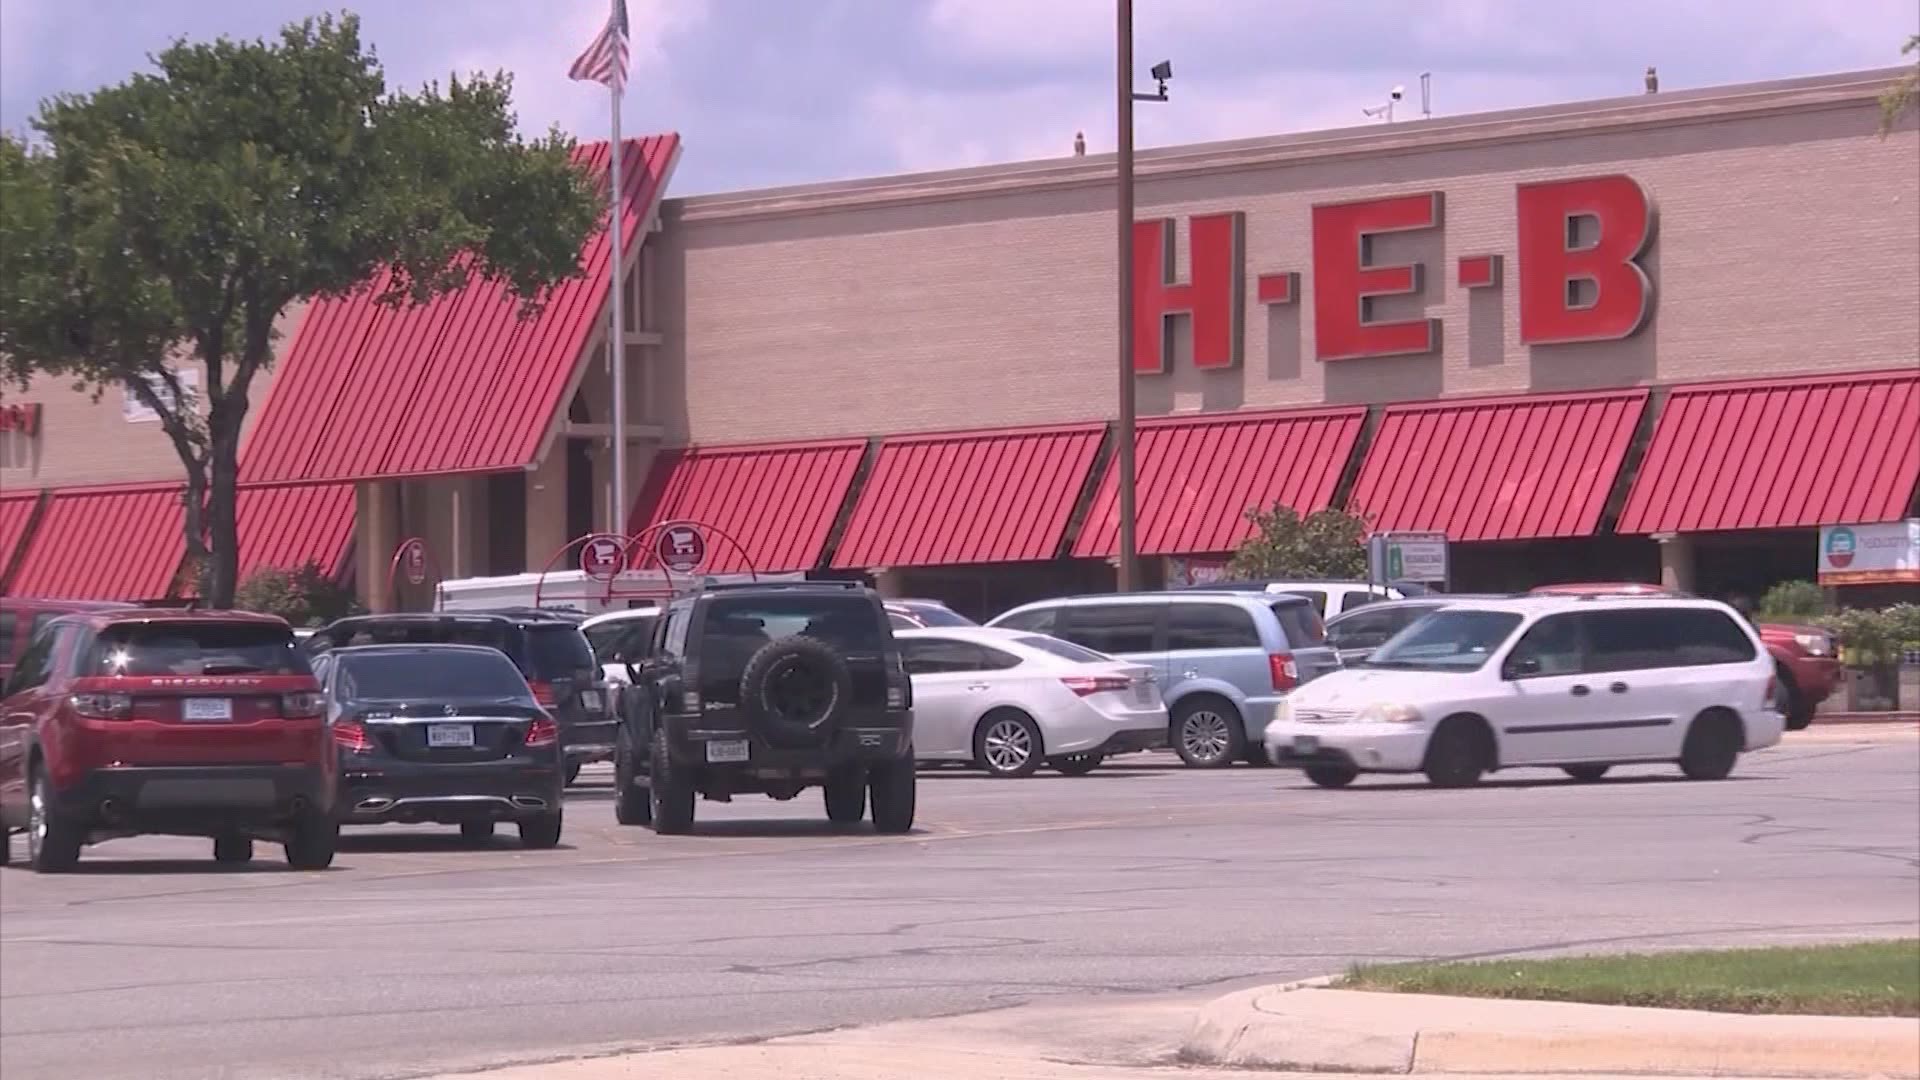 H-E-B is reminding its customers that its policy on masks will remain the same once Texas' mask mandate is lifted.